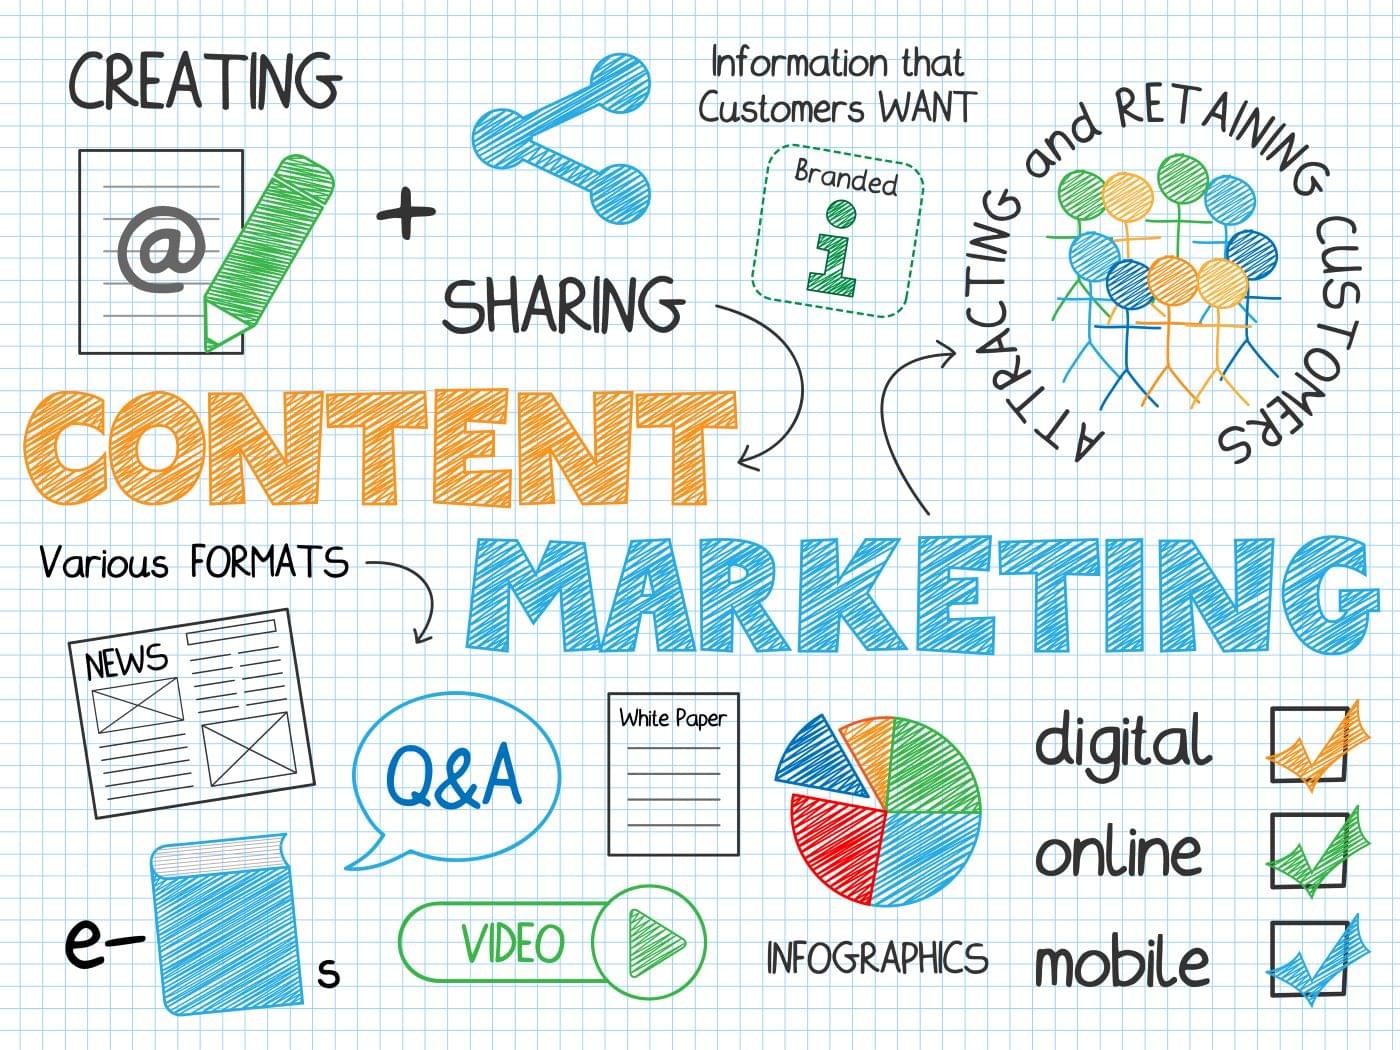 Strategies for content marketing like repurposing content in different formats.